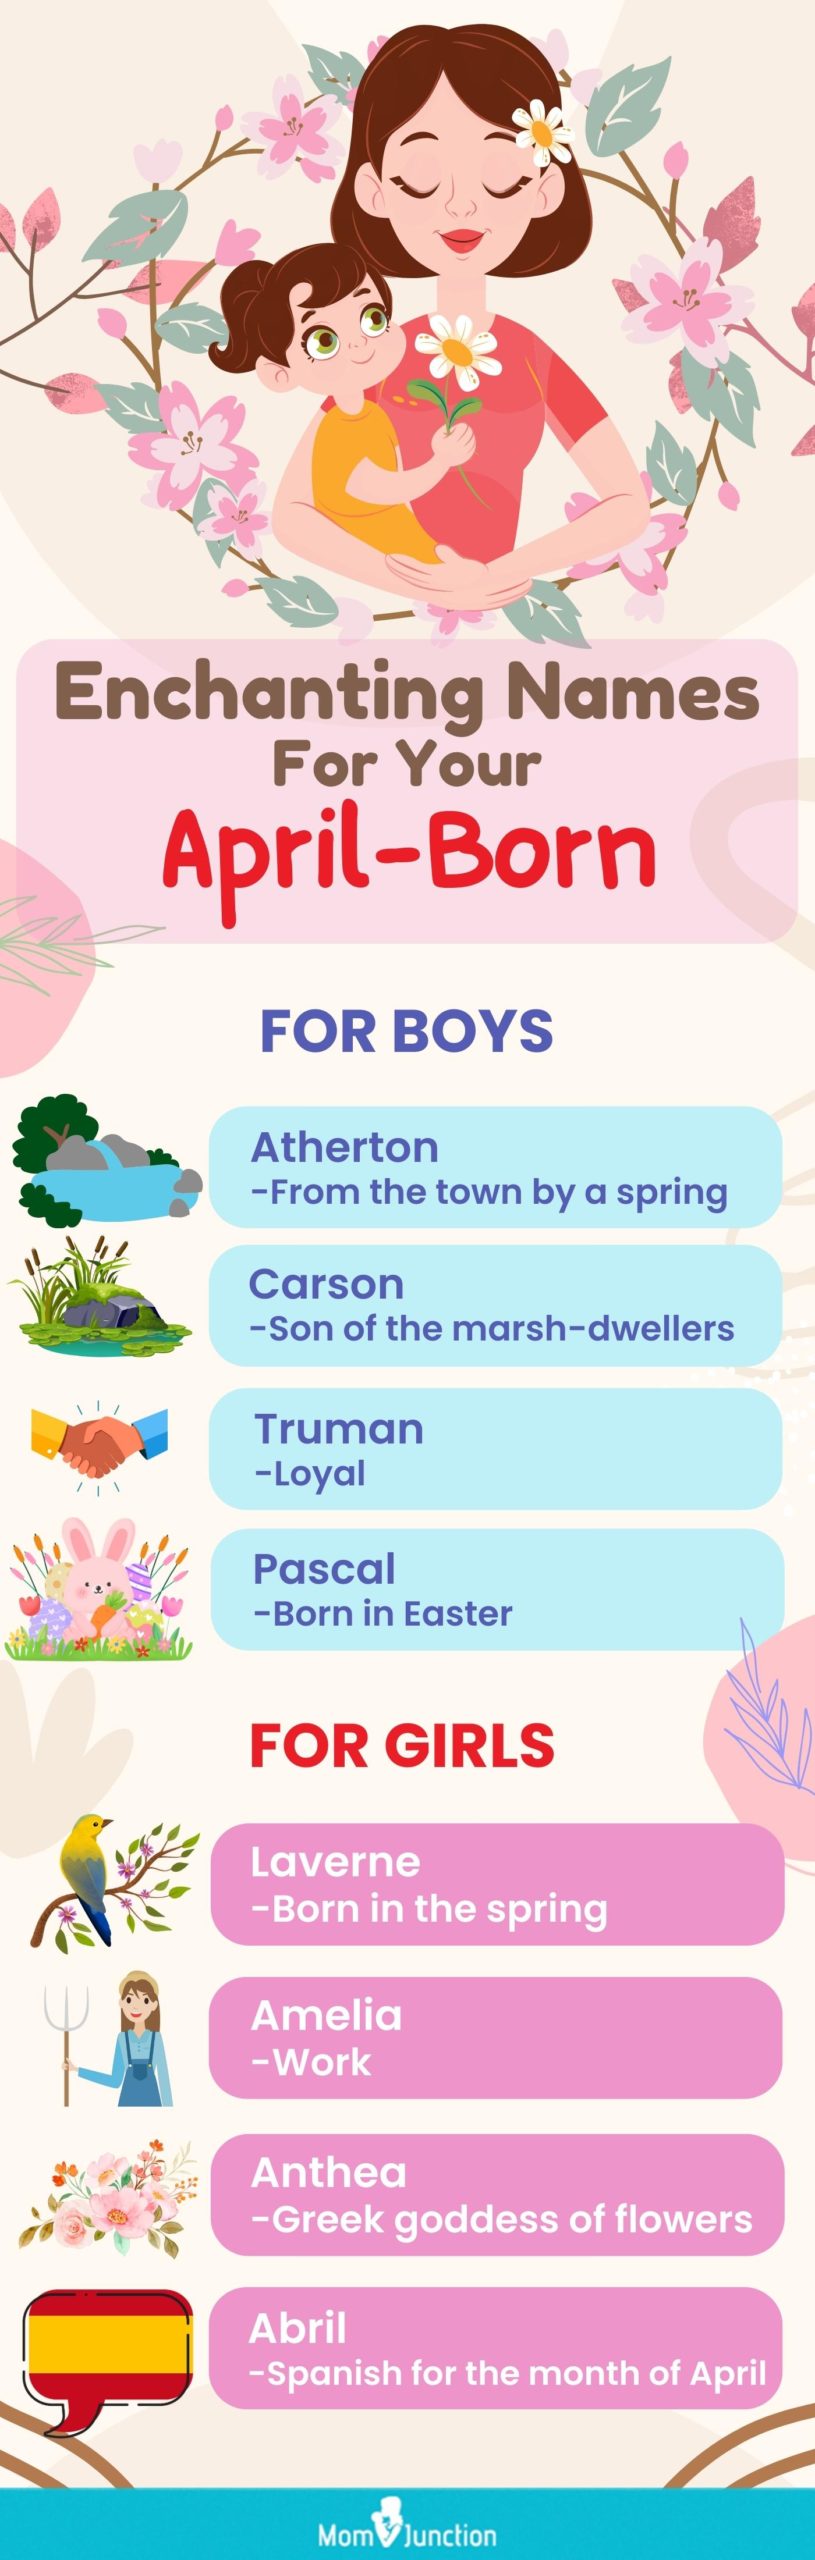 enchanting names for your april born [infographic]